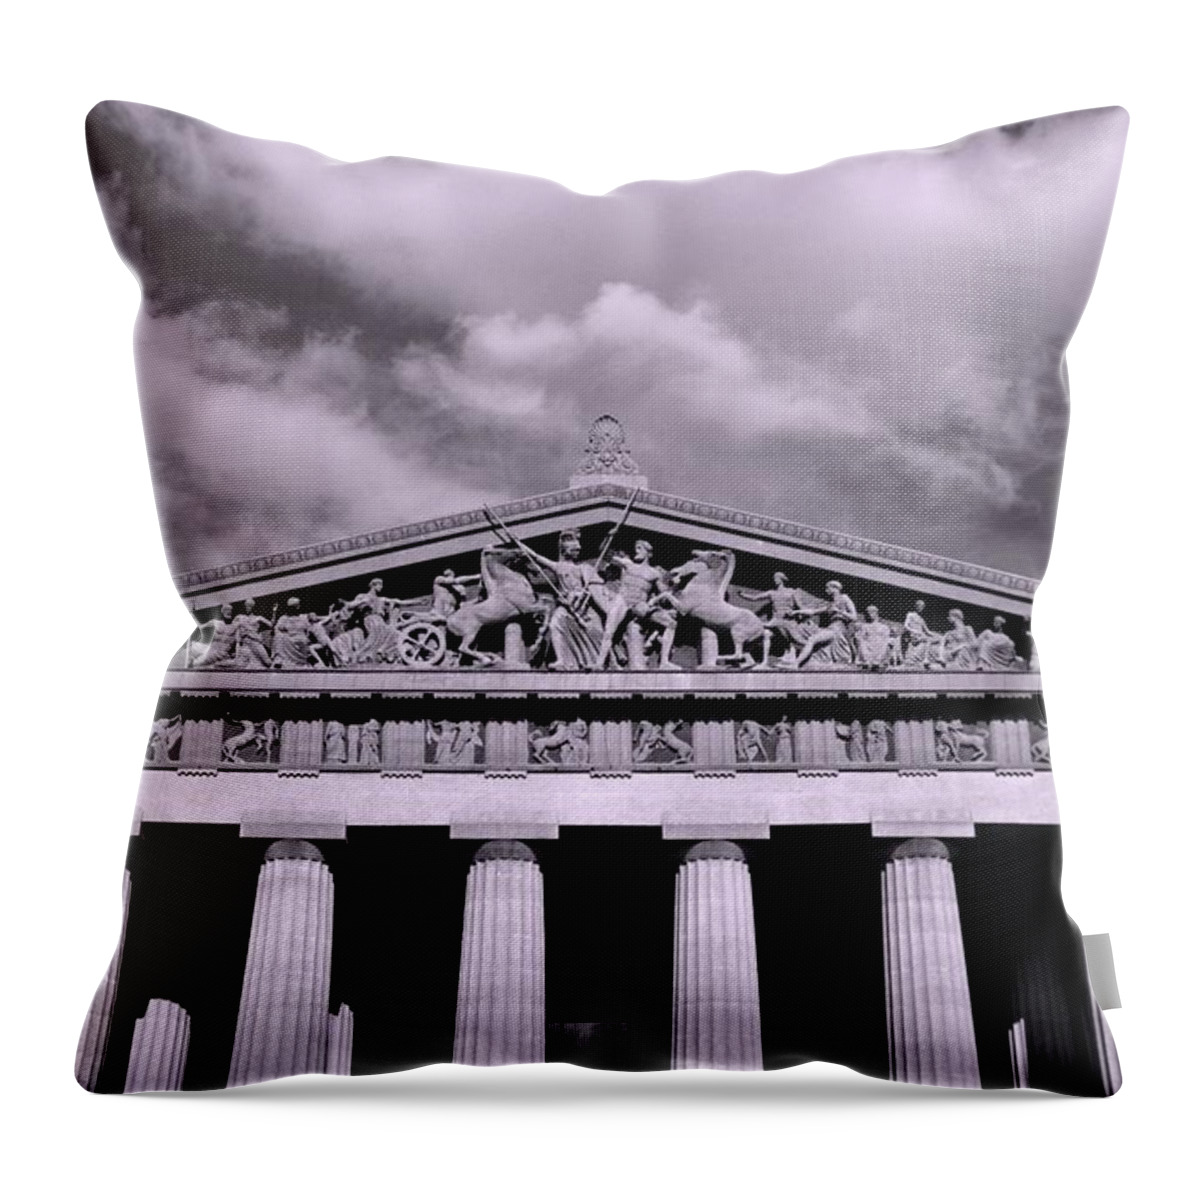 The Parthenon In Nashville Tennessee Black And White Throw Pillow featuring the photograph The Parthenon In Nashville Tennessee Black And White by Lisa Wooten